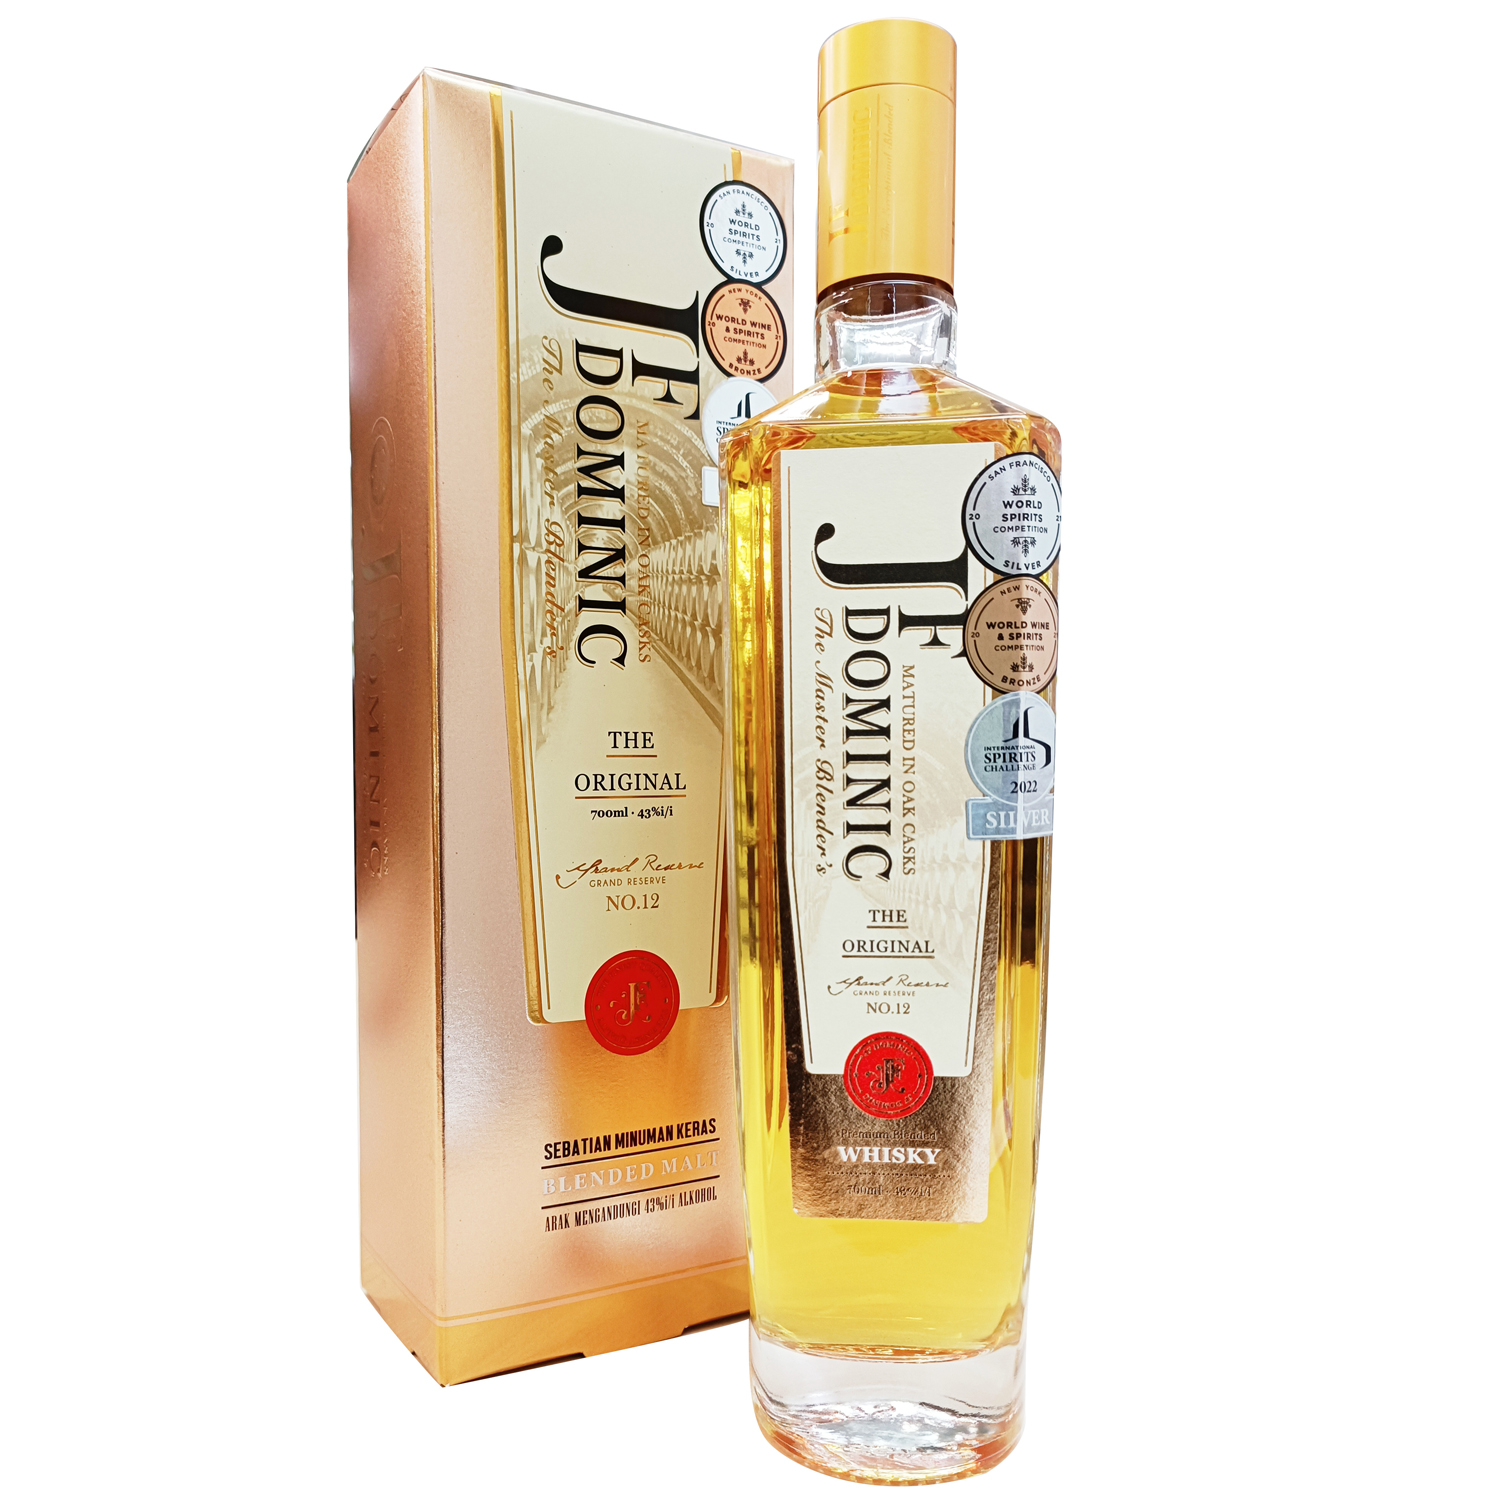 JF Dominic Whisky